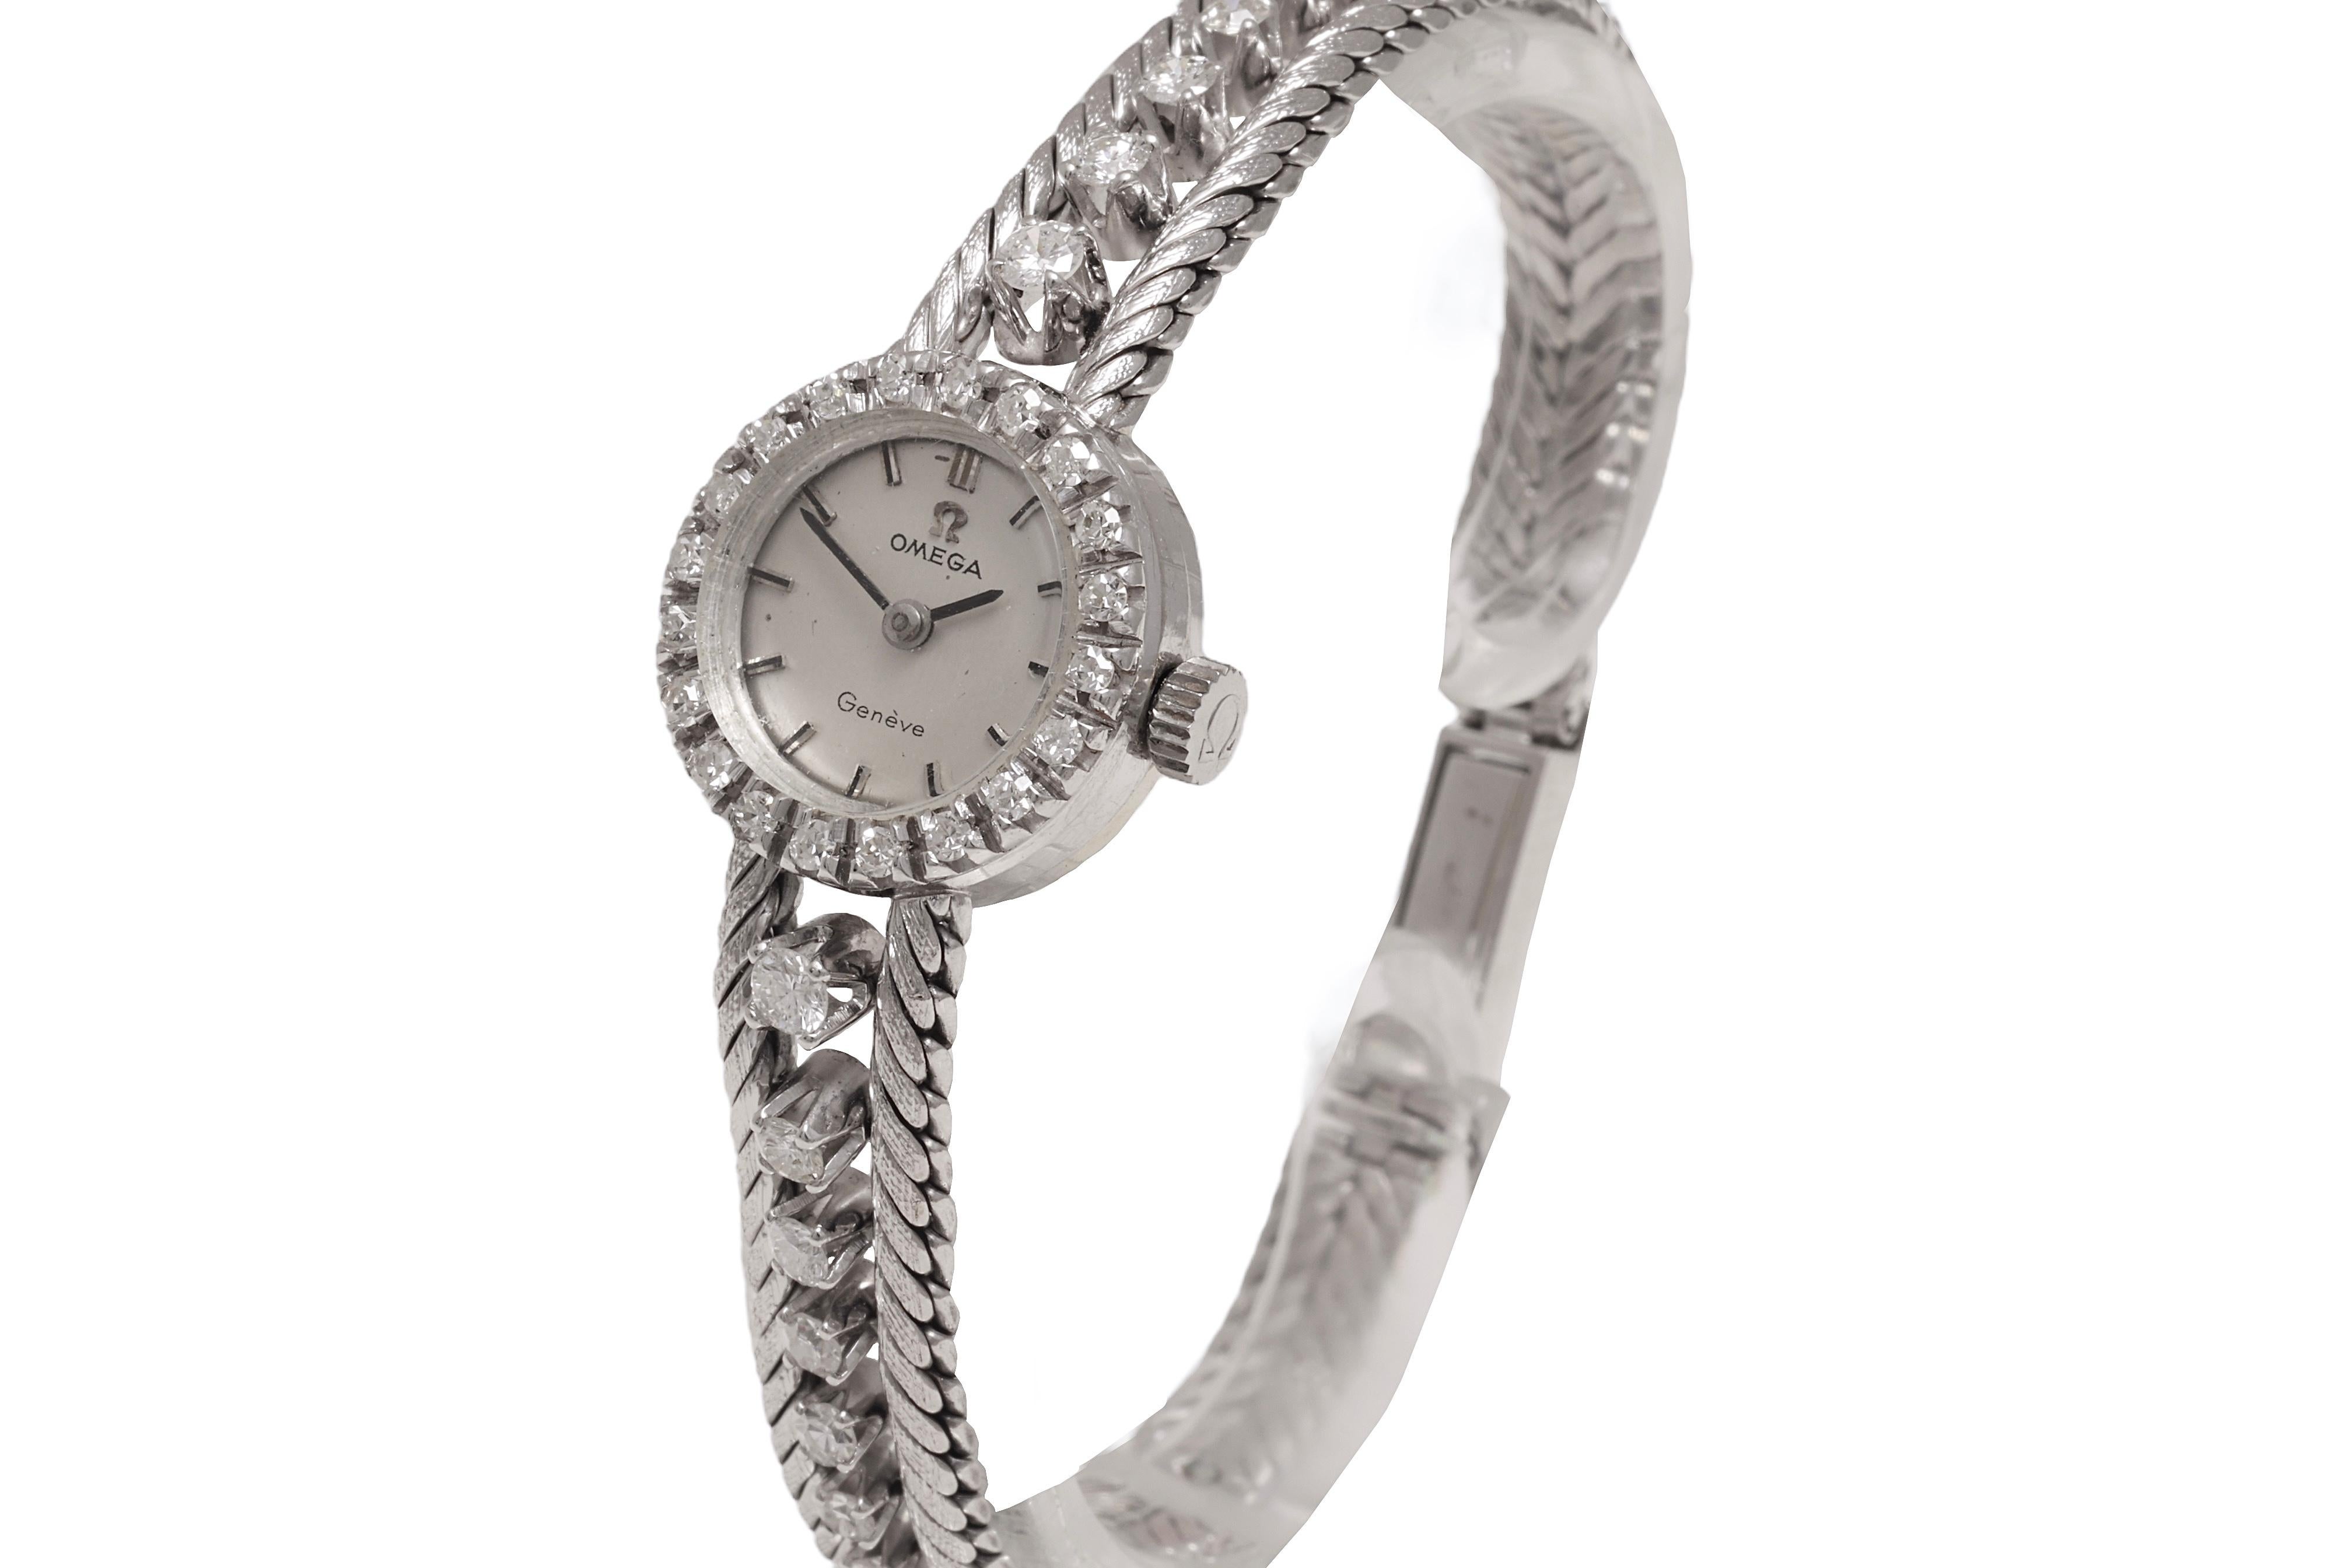 Artisan 18 kt. White Gold Omega Ladies Automatic Wristwatch with 1.32 ct. Diamonds